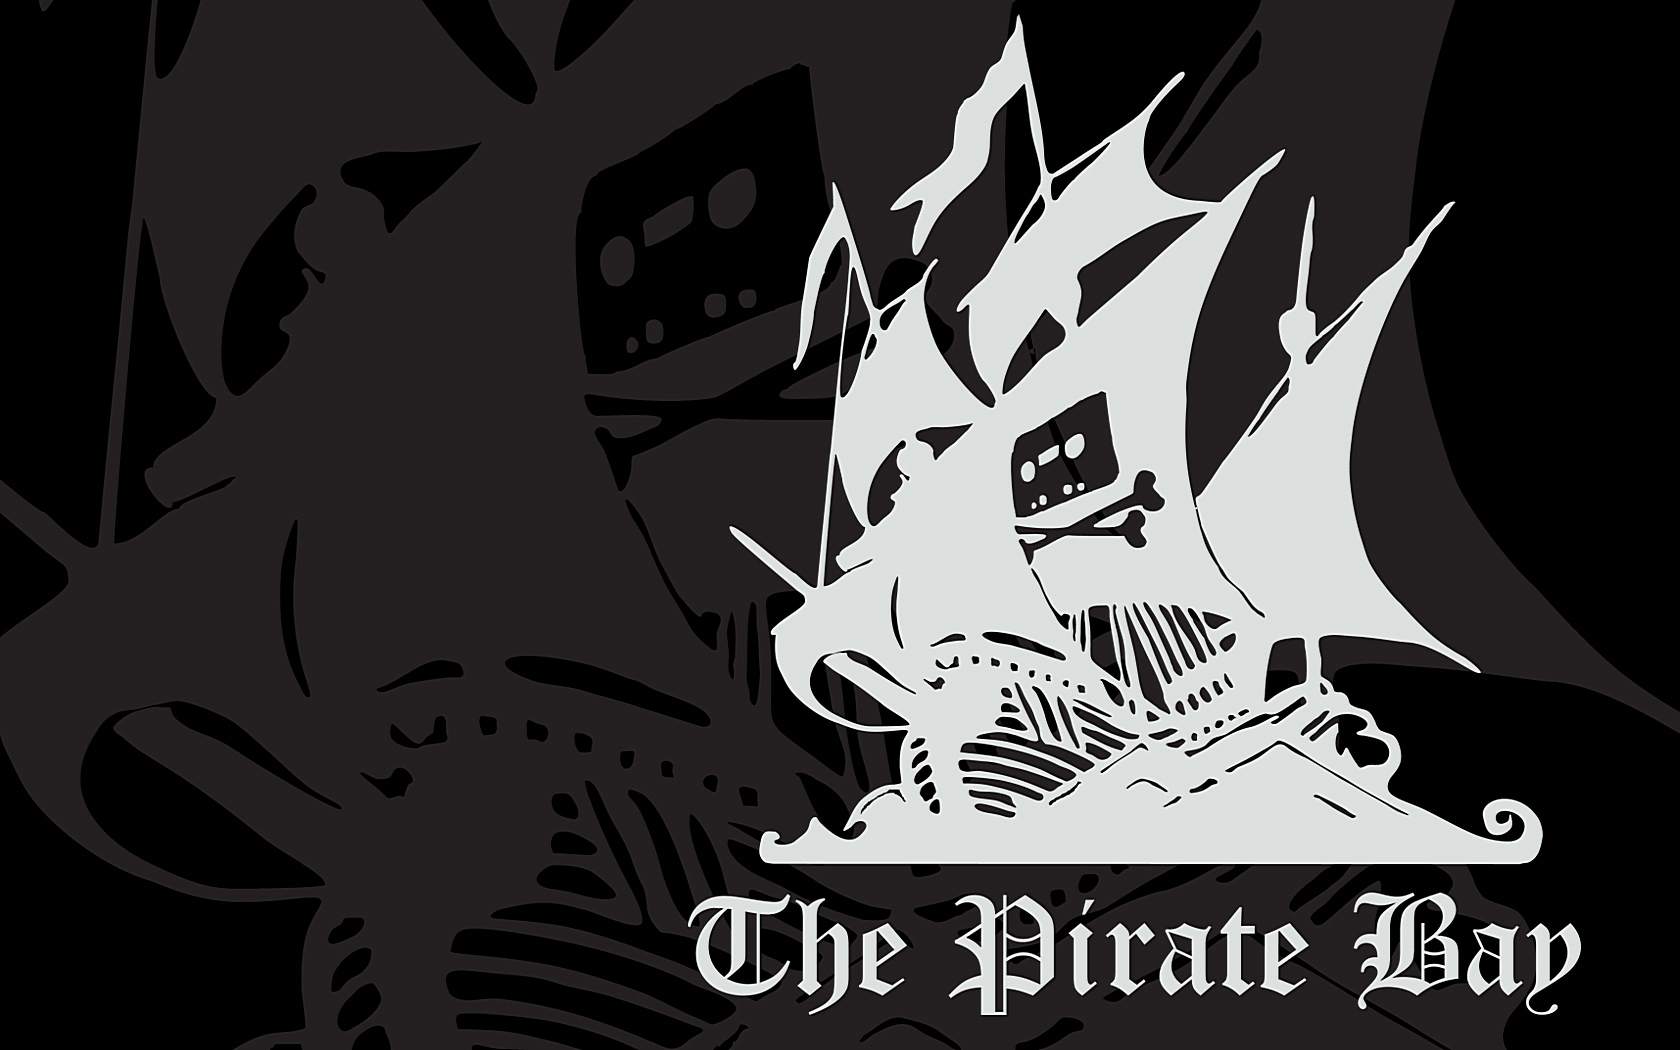 download indesign cc 2015 the pirates bay